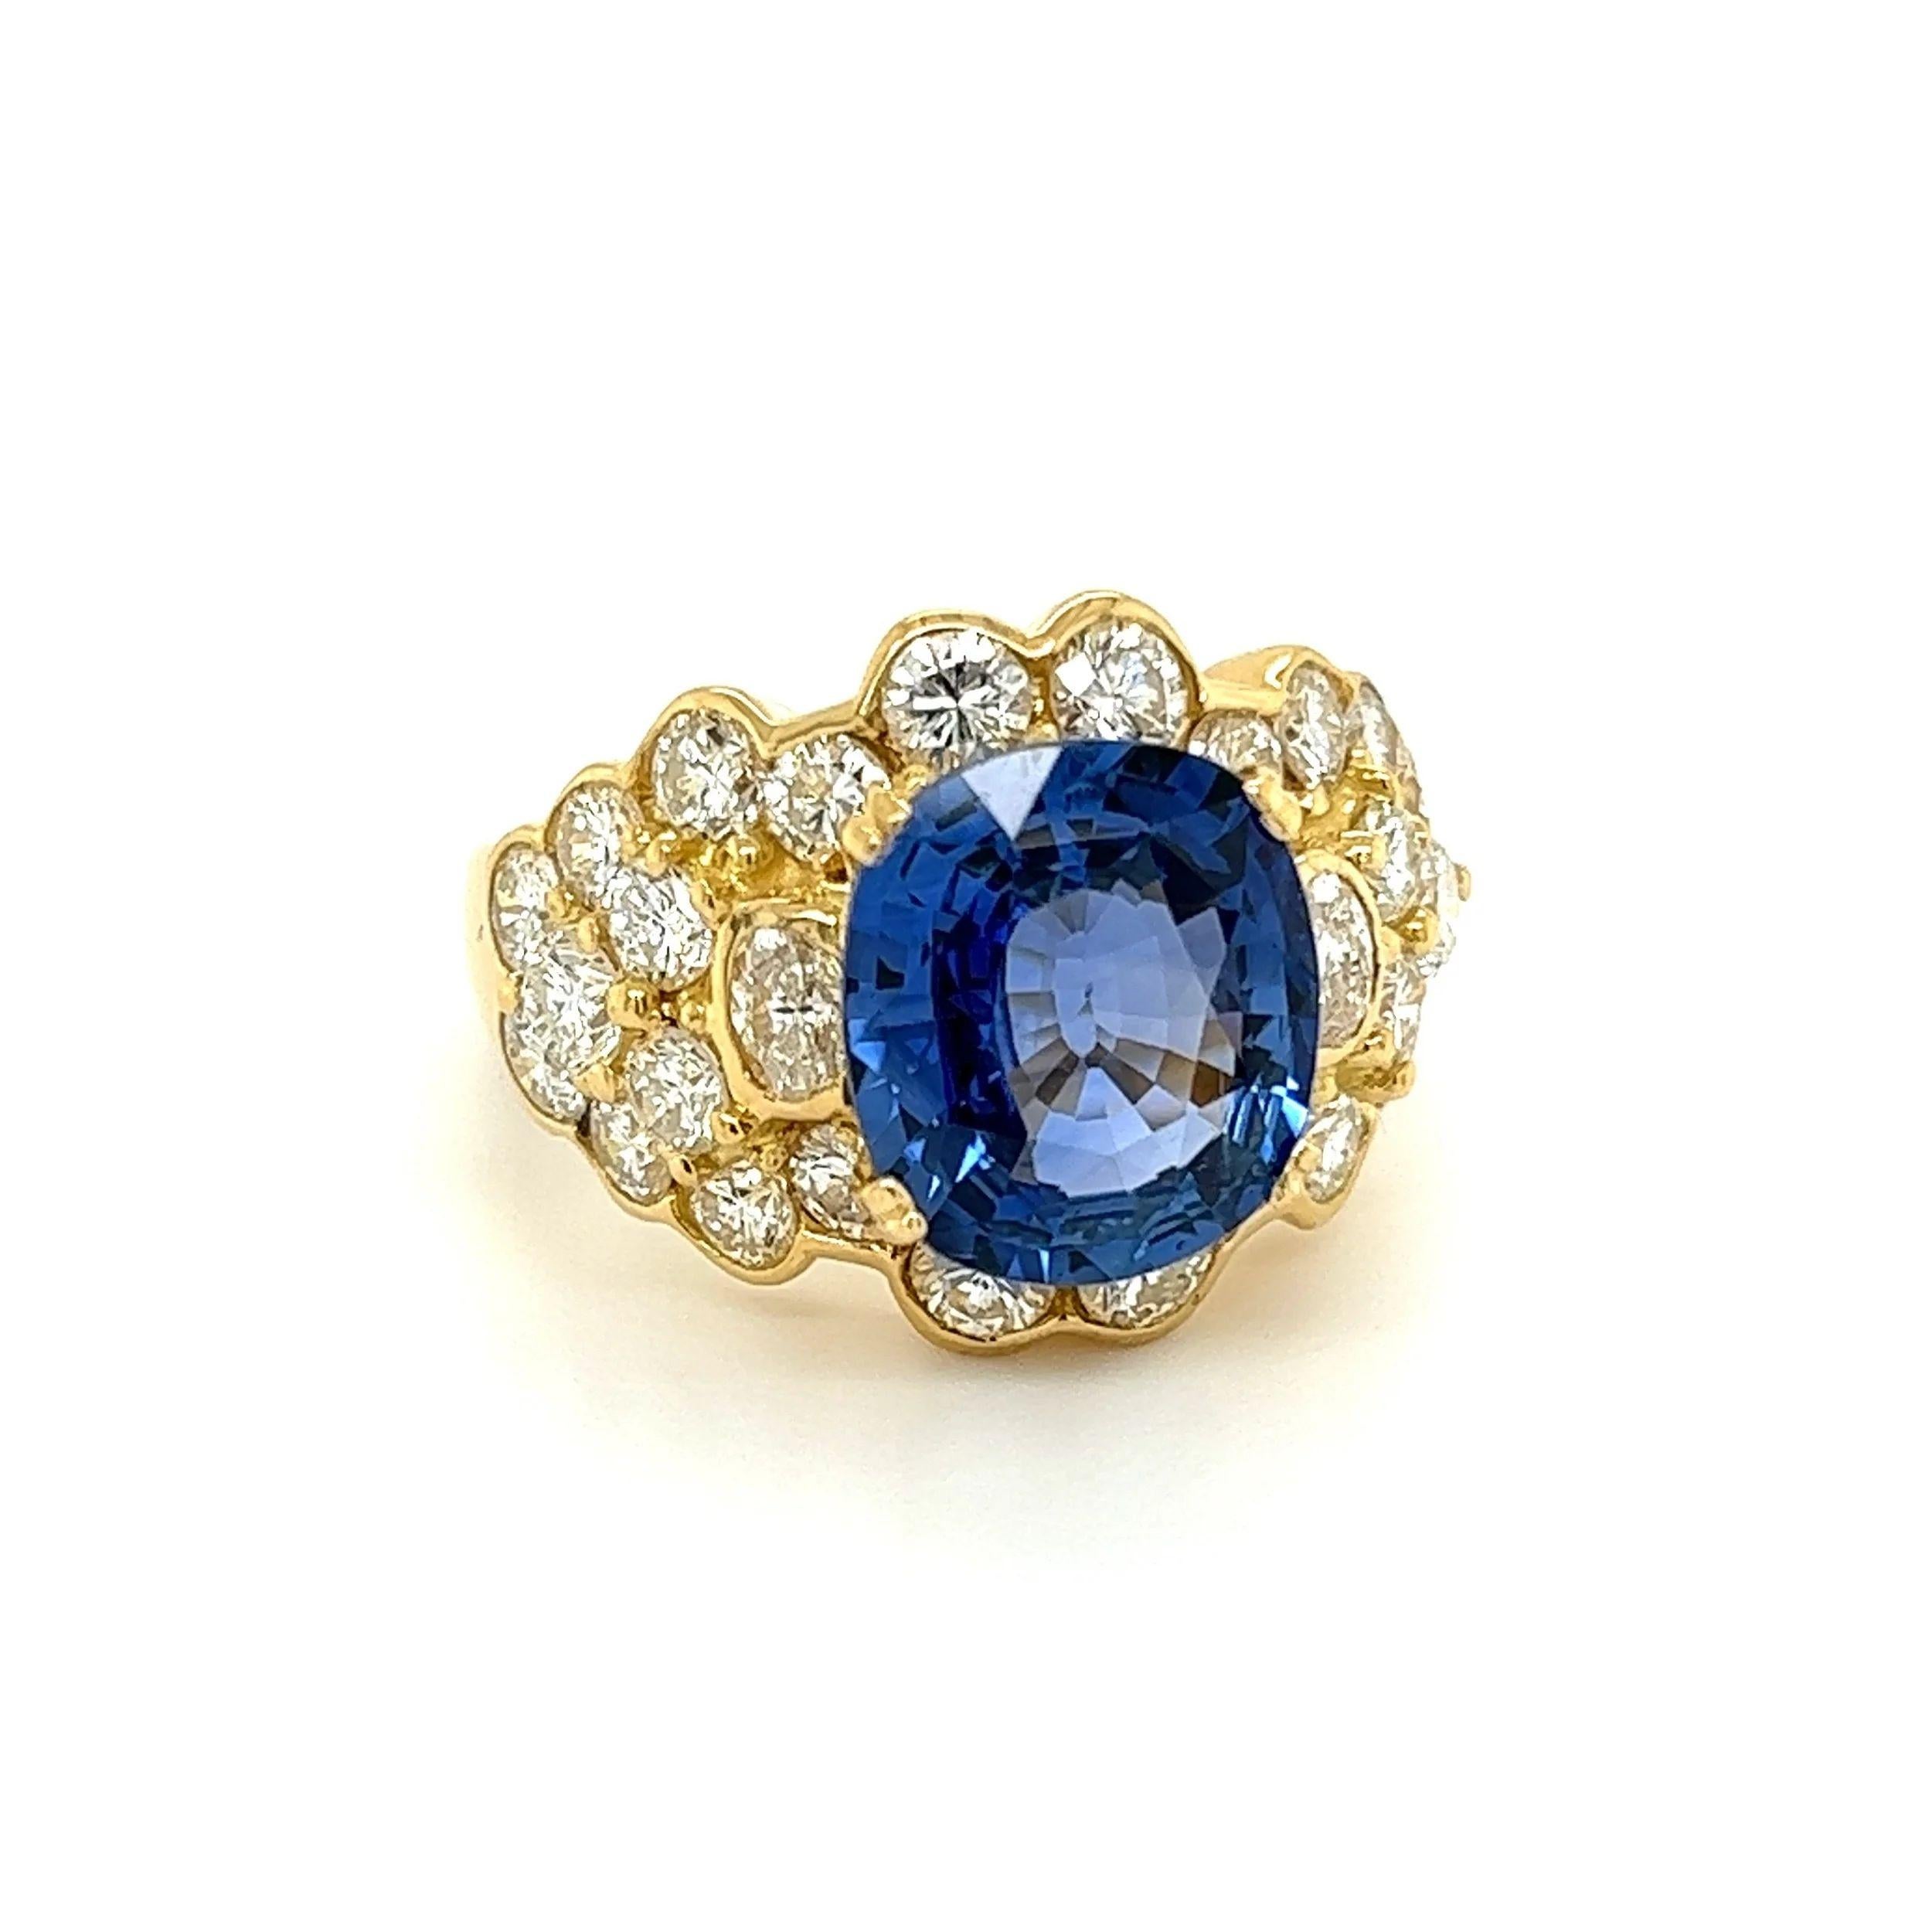 Simply Beautiful! Elegant and finely detailed Blue Sapphire and Diamond Dome Gold Vintage Cocktail Ring. Centering a securely nestled Hand set 4.64 Oval Blue Sapphire. Artfully surrounded by Diamonds, weighing approx. 3.22tcw. Ring size 7.75, ring